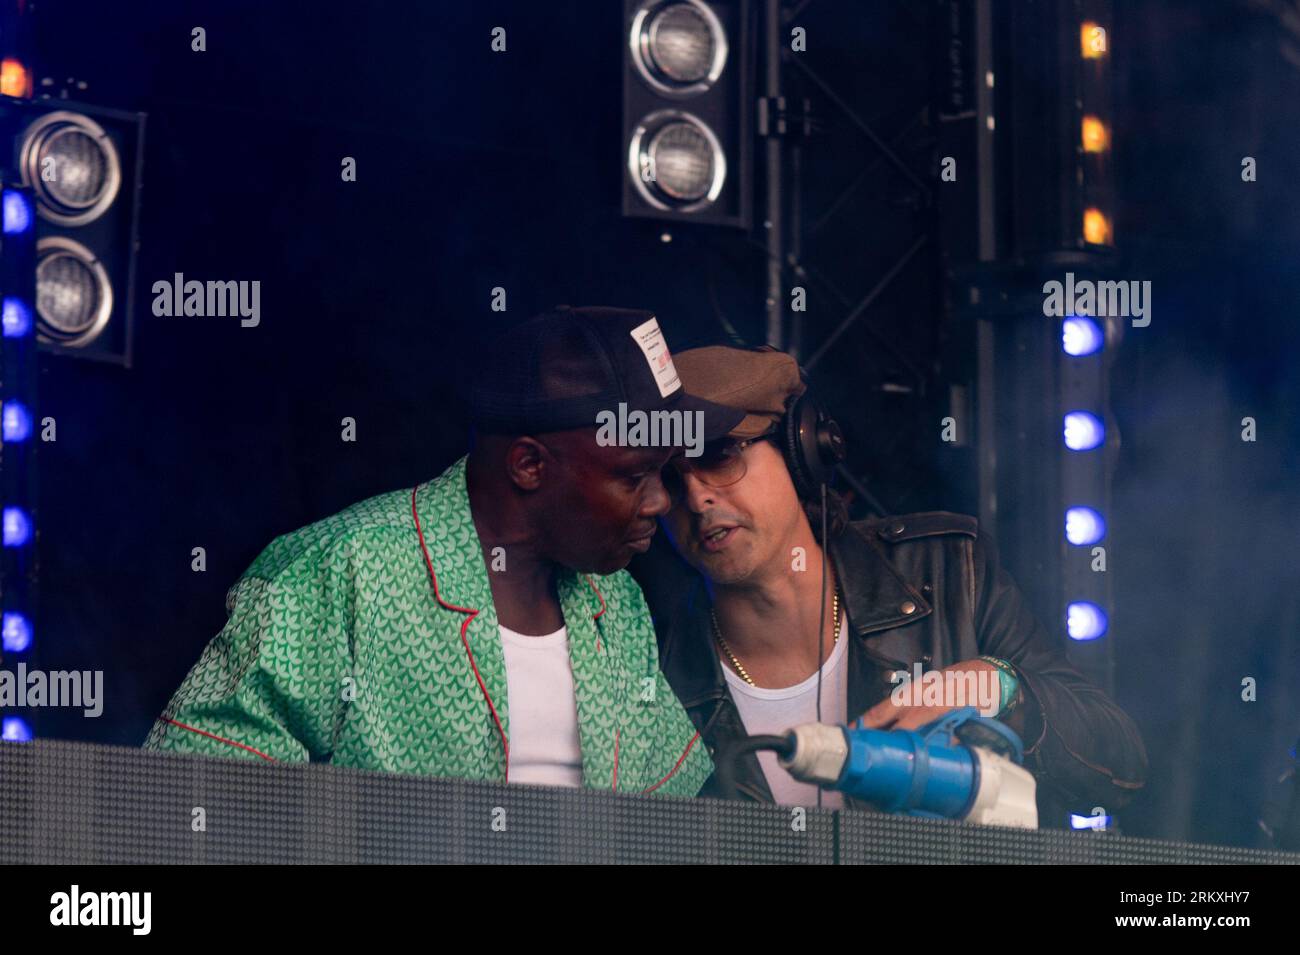 London, United Kingdom. 25th August 2023. Gary Powell and Carl Barat from the Libertines, La Roux and Jamie Reynolds (Klaxons) entertain the crowd from the decks at All Points Festival in East London. Cristina Massei/Alamy Live News Stock Photo